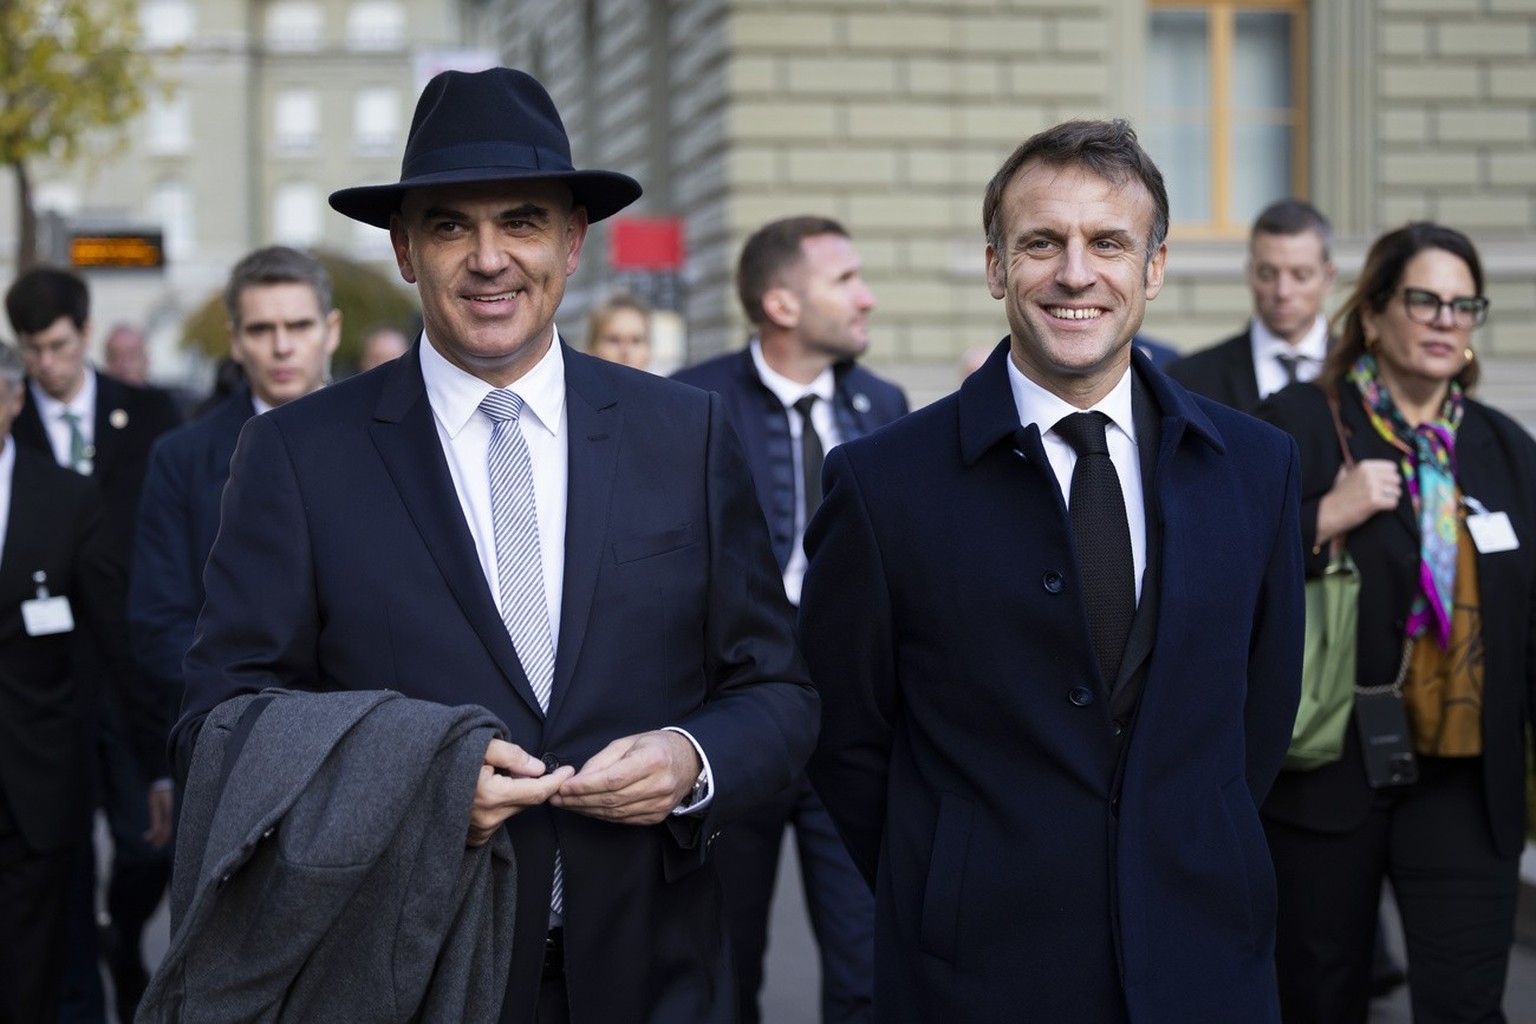 Swiss Federal President Alain Berset, left, and French President Emanuel Macron discuss on their way to the delegation meeting in front of the Federal Palace, the Swiss Parliament building, in Bern, S ...